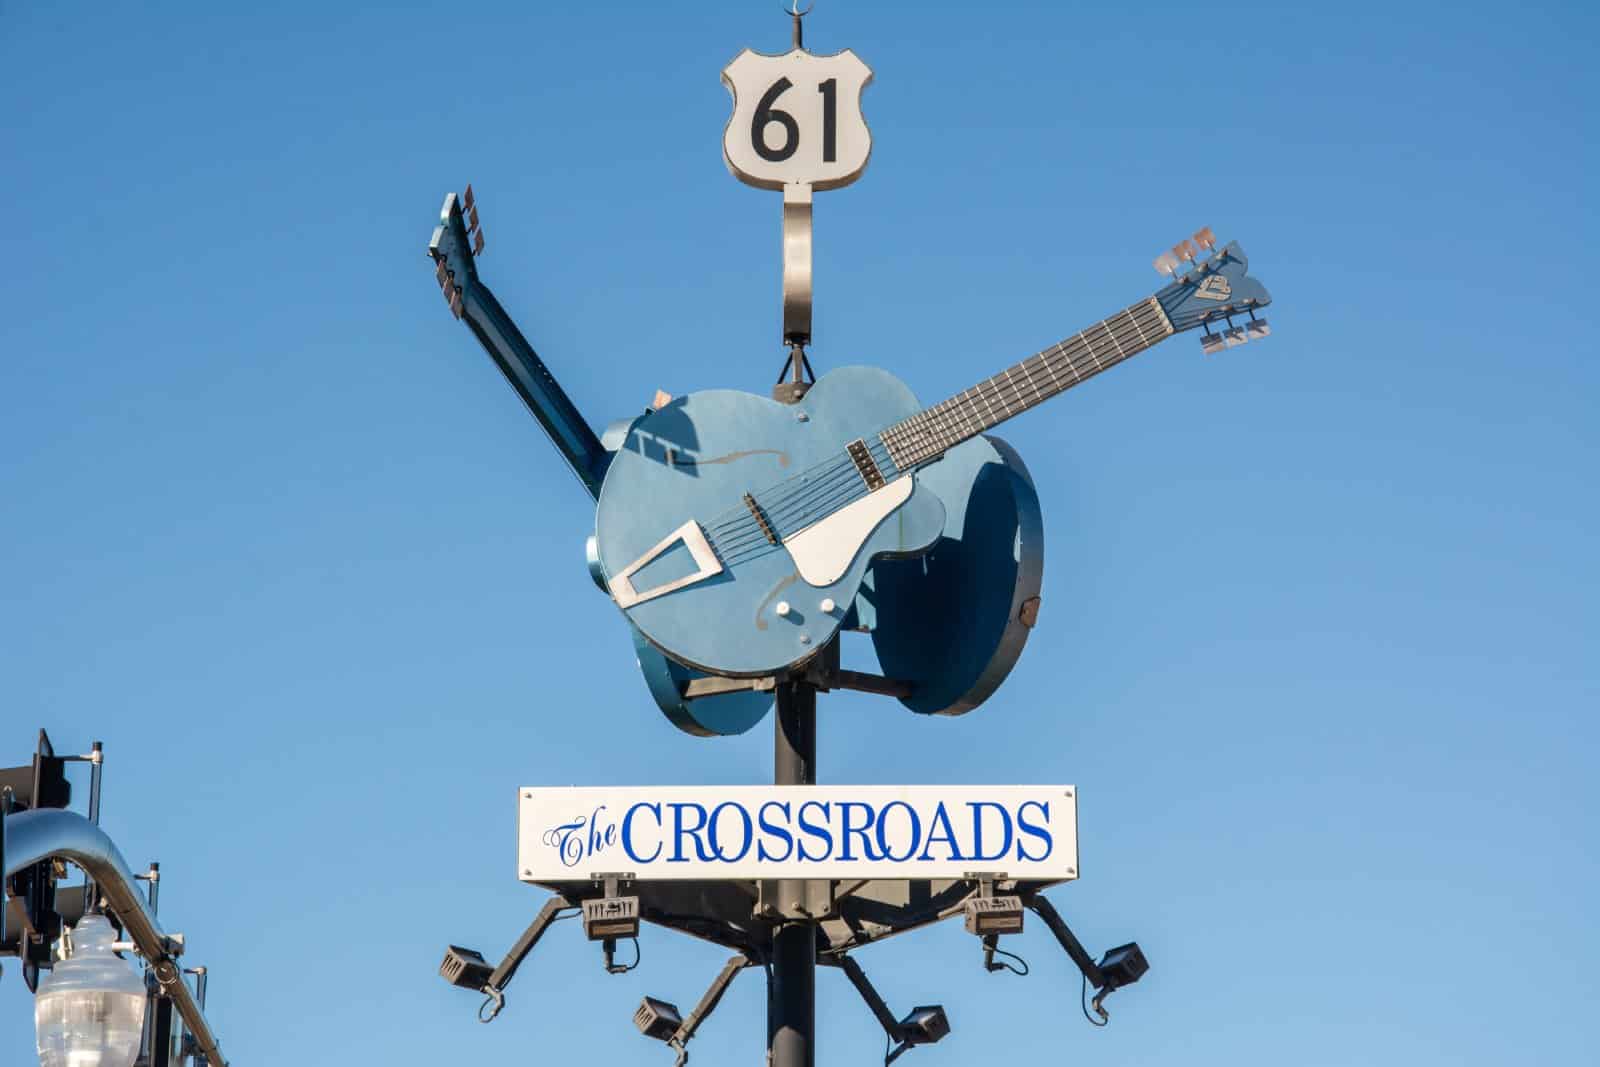 <p class="wp-caption-text">Image Credit: Shutterstock / Nina Alizada</p>  <p><span>The Crossroads in Cleveland, Mississippi, is steeped in blues lore as the place where legendary musician Robert Johnson supposedly sold his soul to the devil for musical genius. This mythical location represents the deep roots of the blues in the Mississippi Delta, an essential genre in the evolution of rock ‘n’ roll. Visitors can explore the area’s rich musical history, including the Delta Blues Museum in nearby Clarksdale.</span></p>